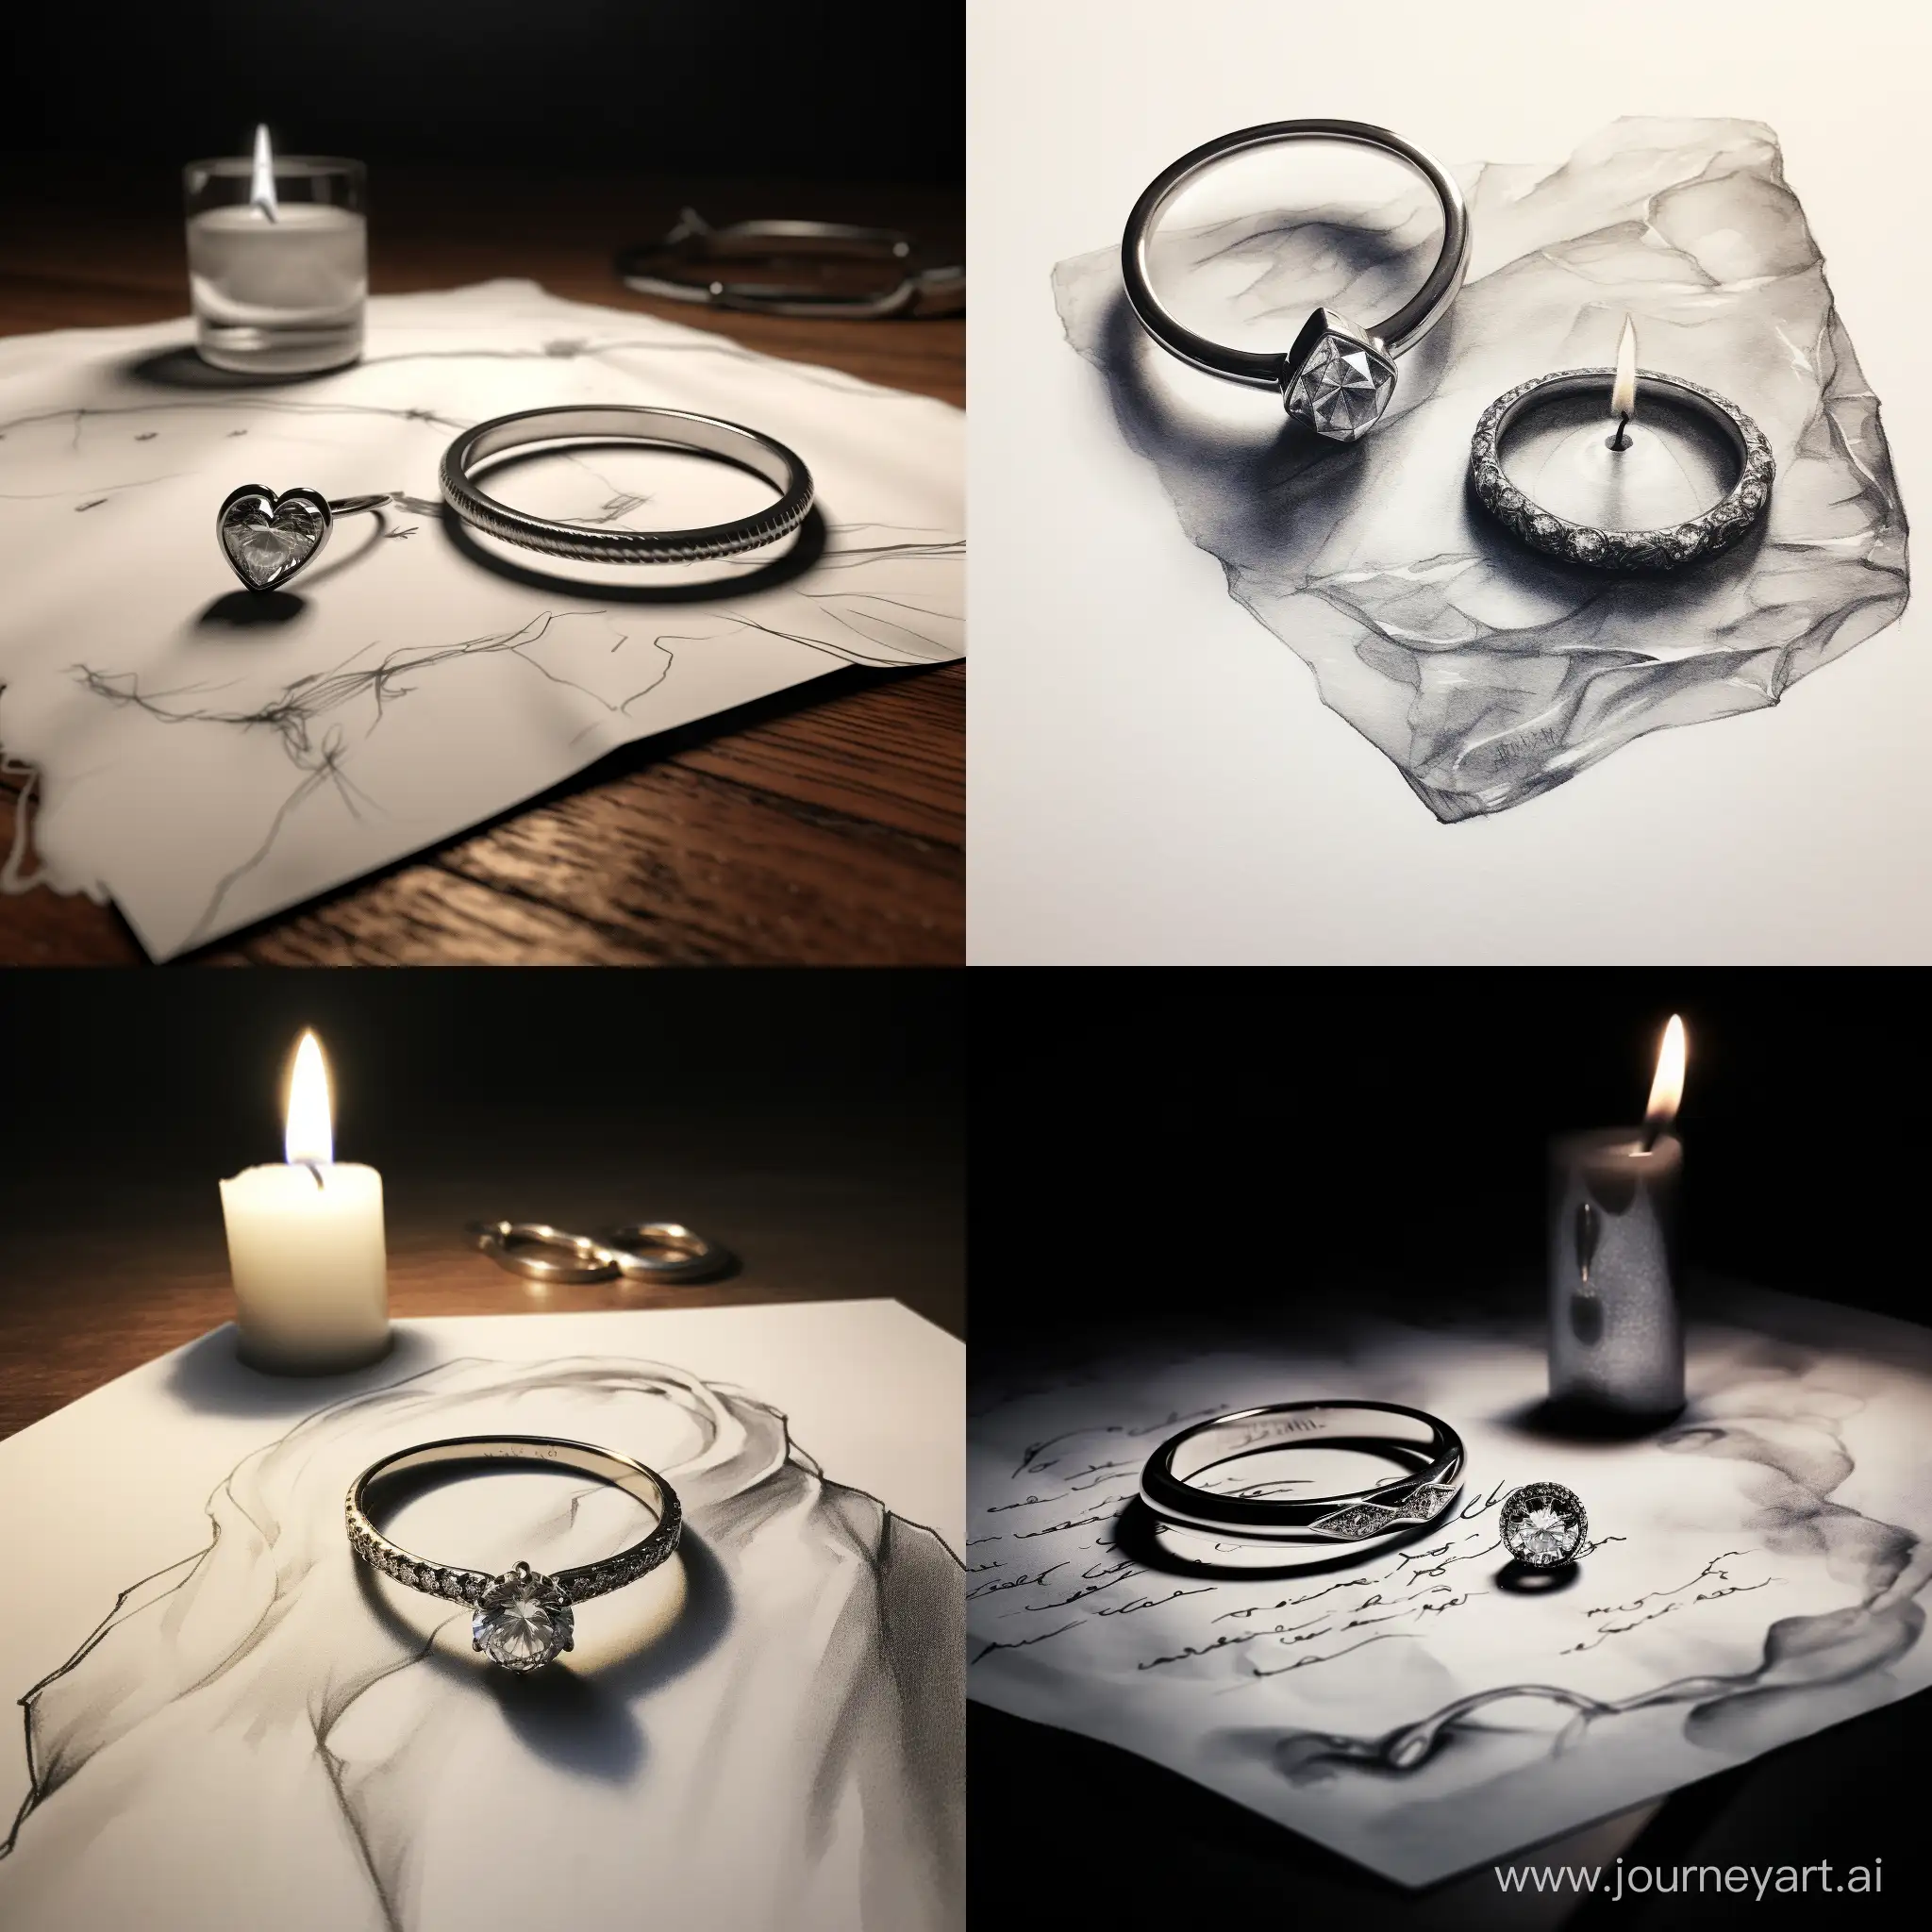 Romantic-Setting-Melted-Candle-Diamond-Ring-and-Art-Masterpiece